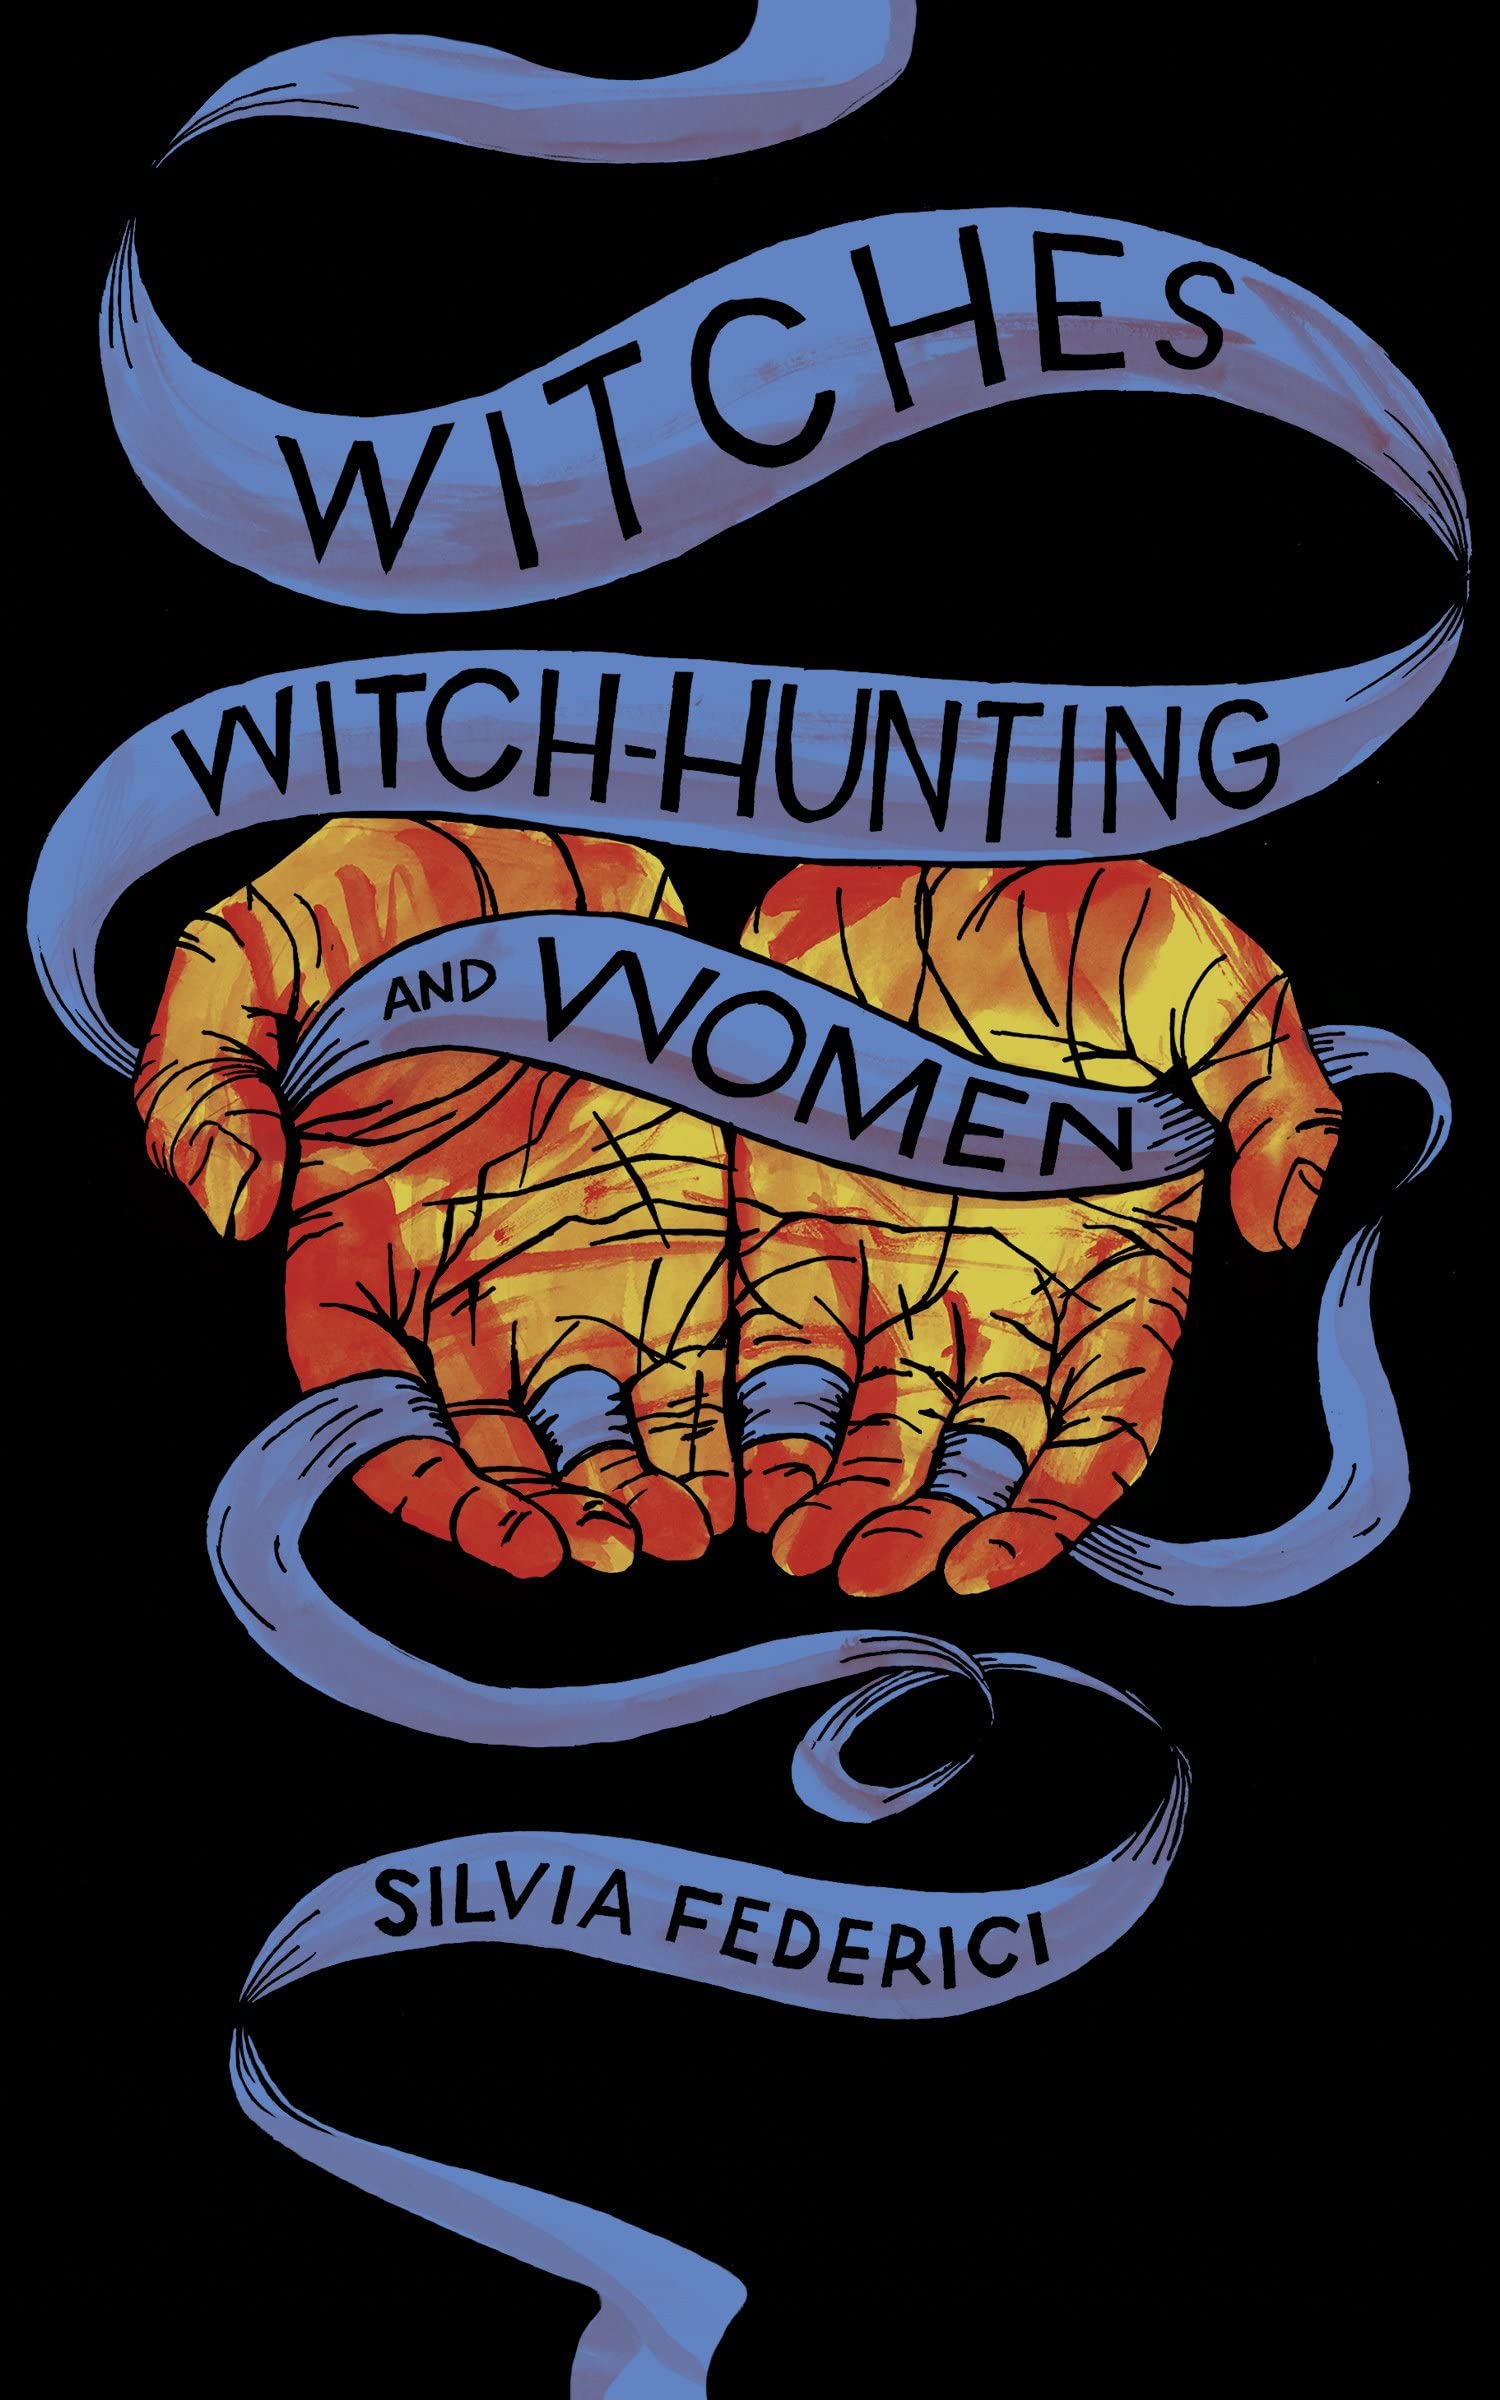 Silvia Federici’s Witches, witch-hunting, and women; a book review